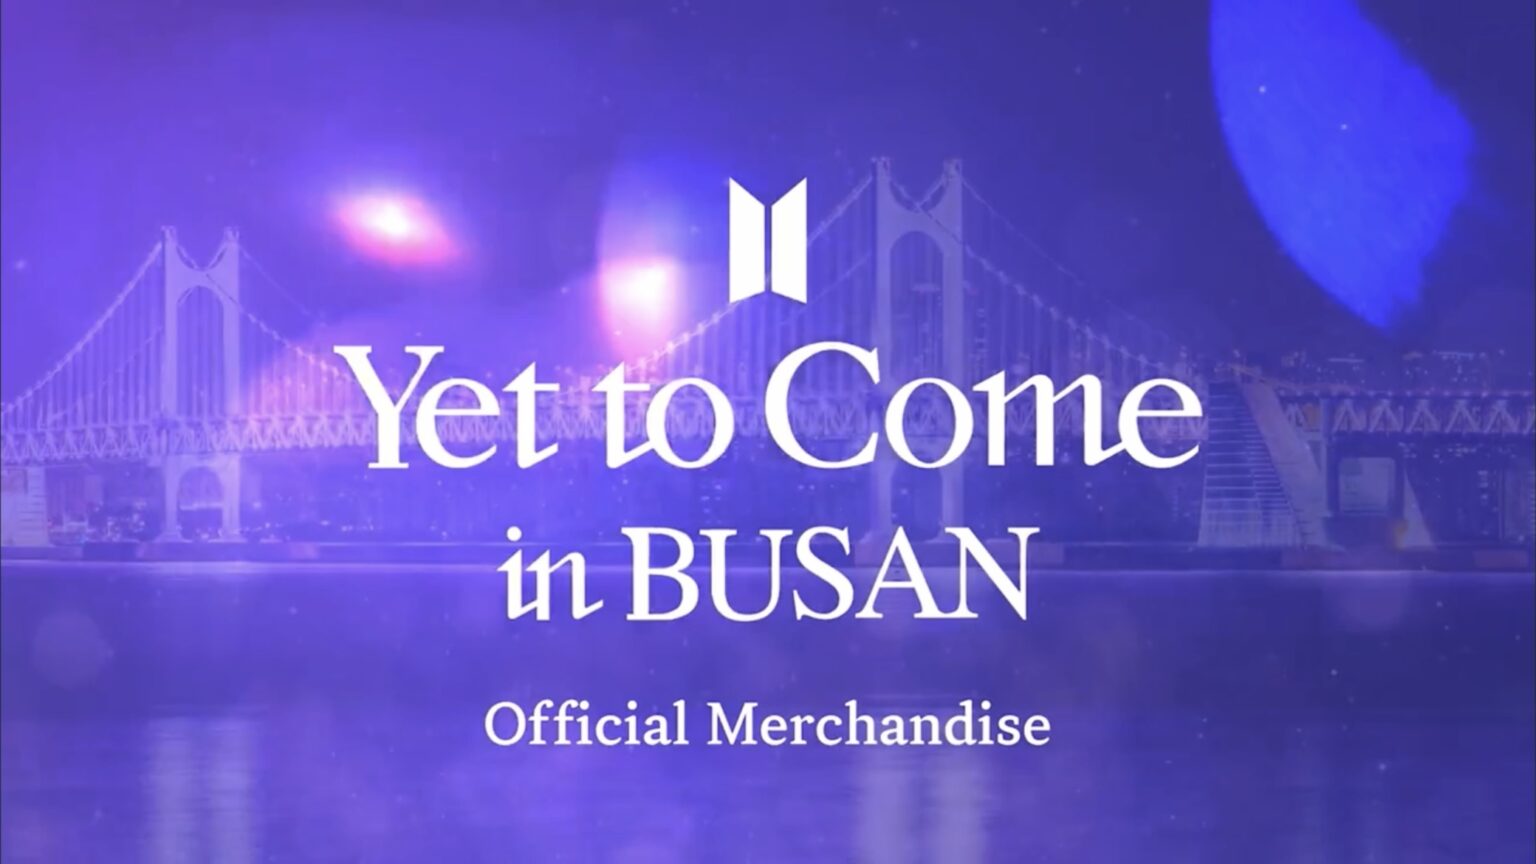 BTS 釜山コンサート「Yet To Come in BUSAN」の公式グッズが再販決定 